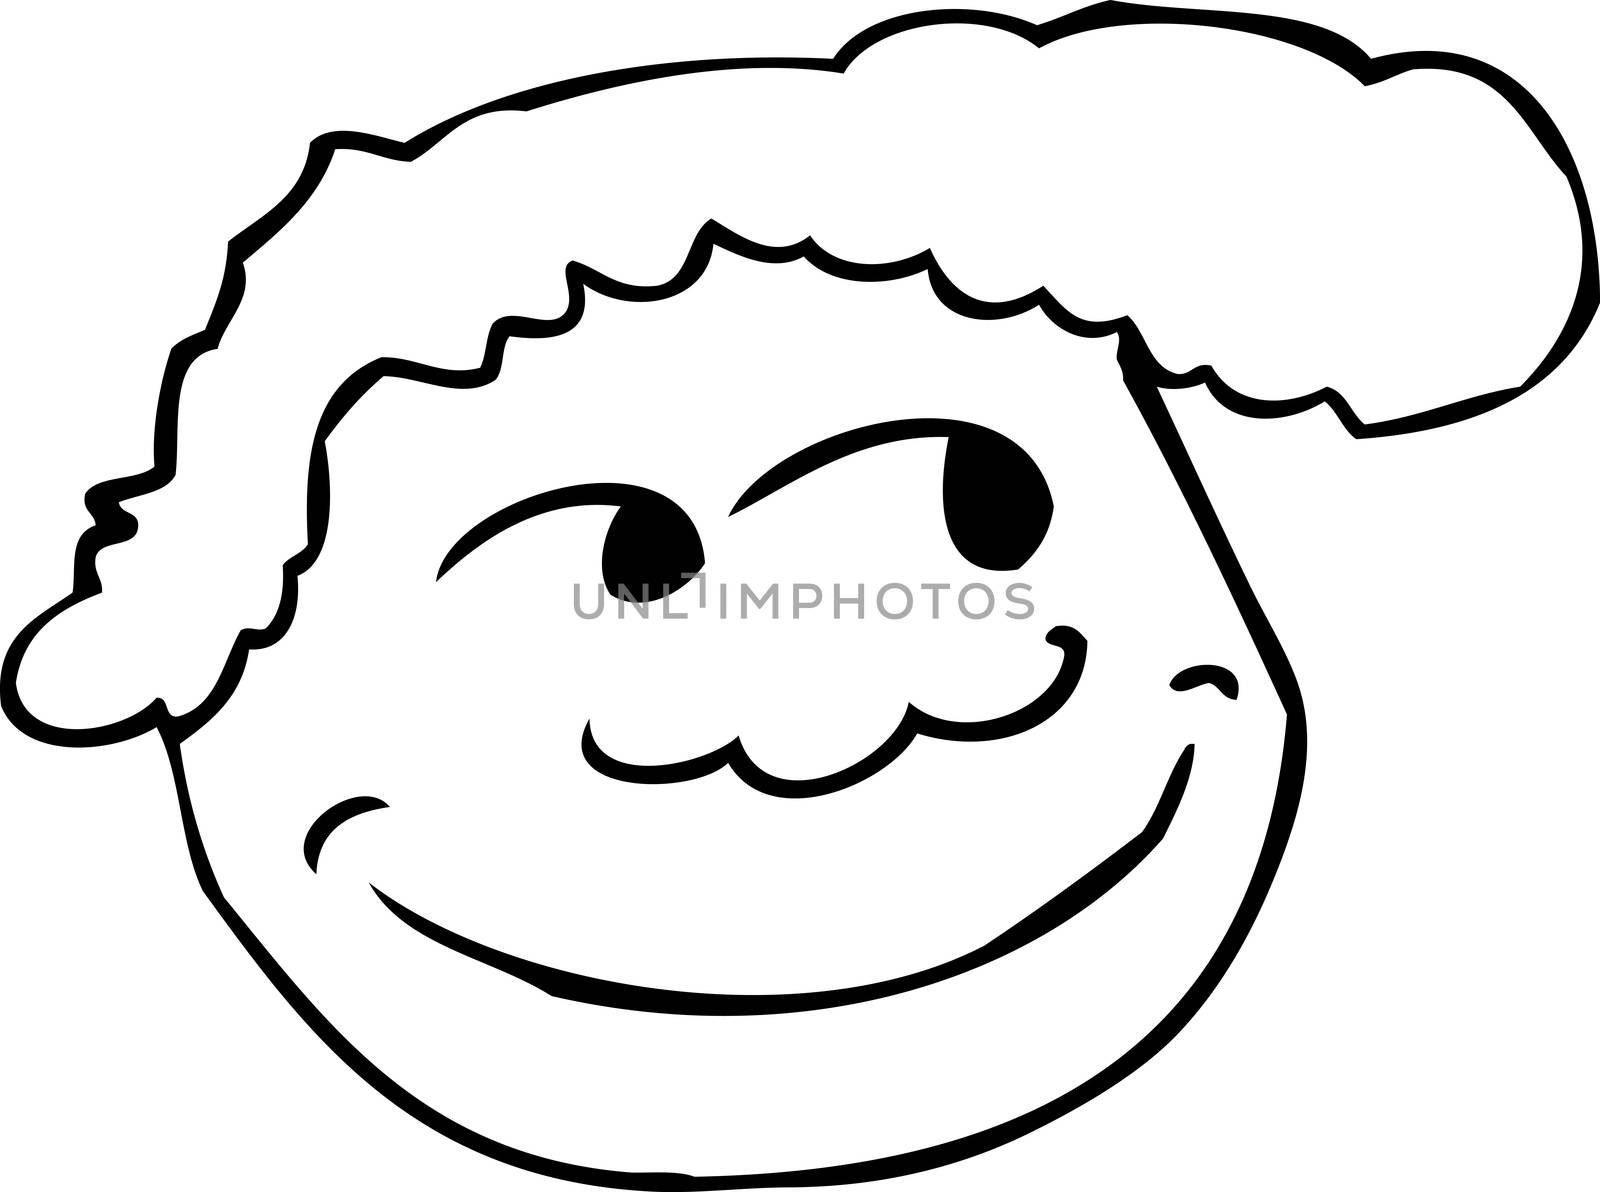 Outline of grinning face with smile over white background